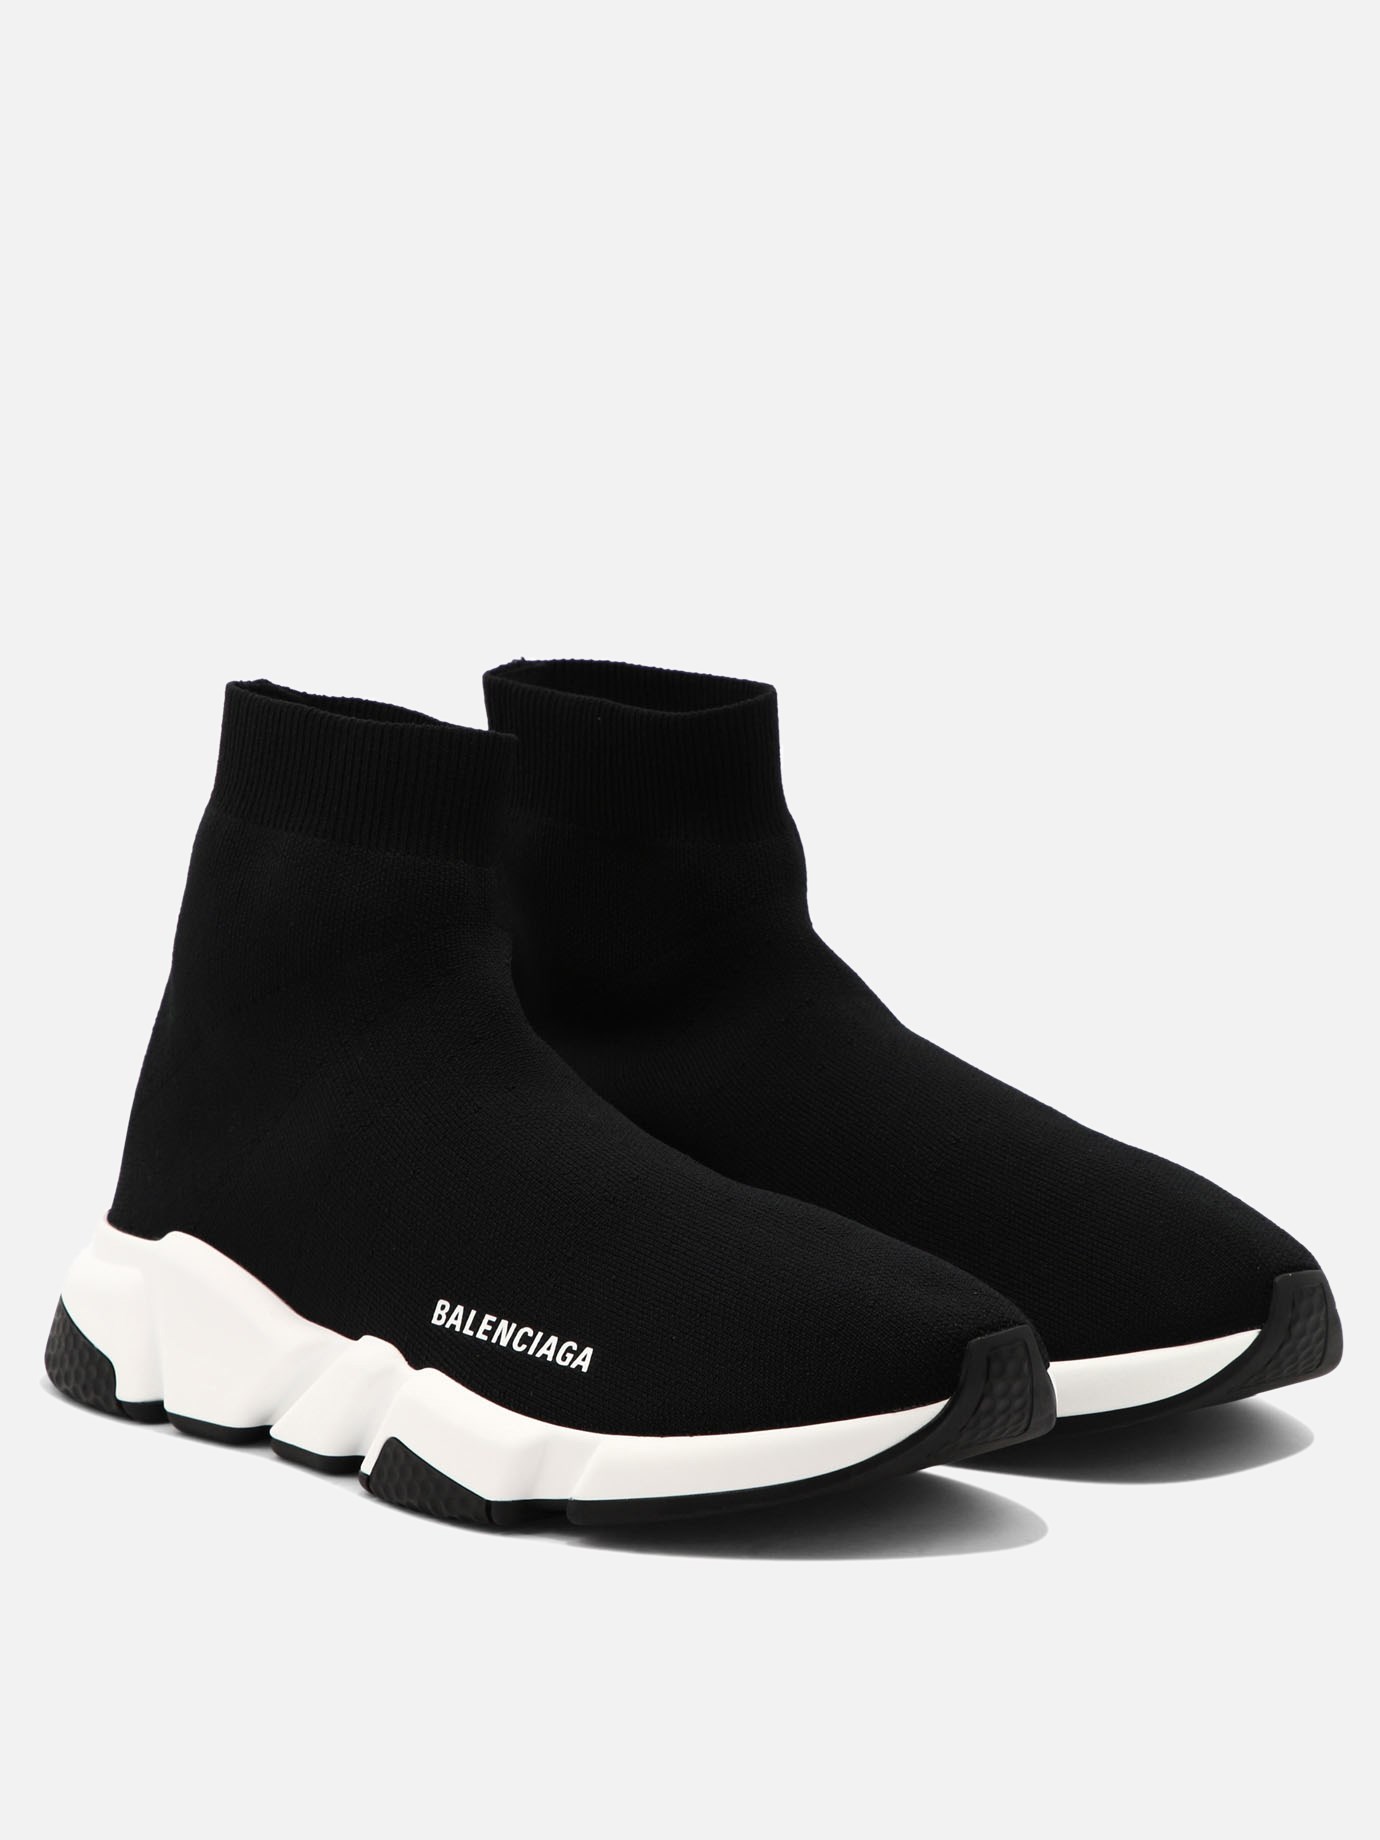  Speed  sneakers by Balenciaga